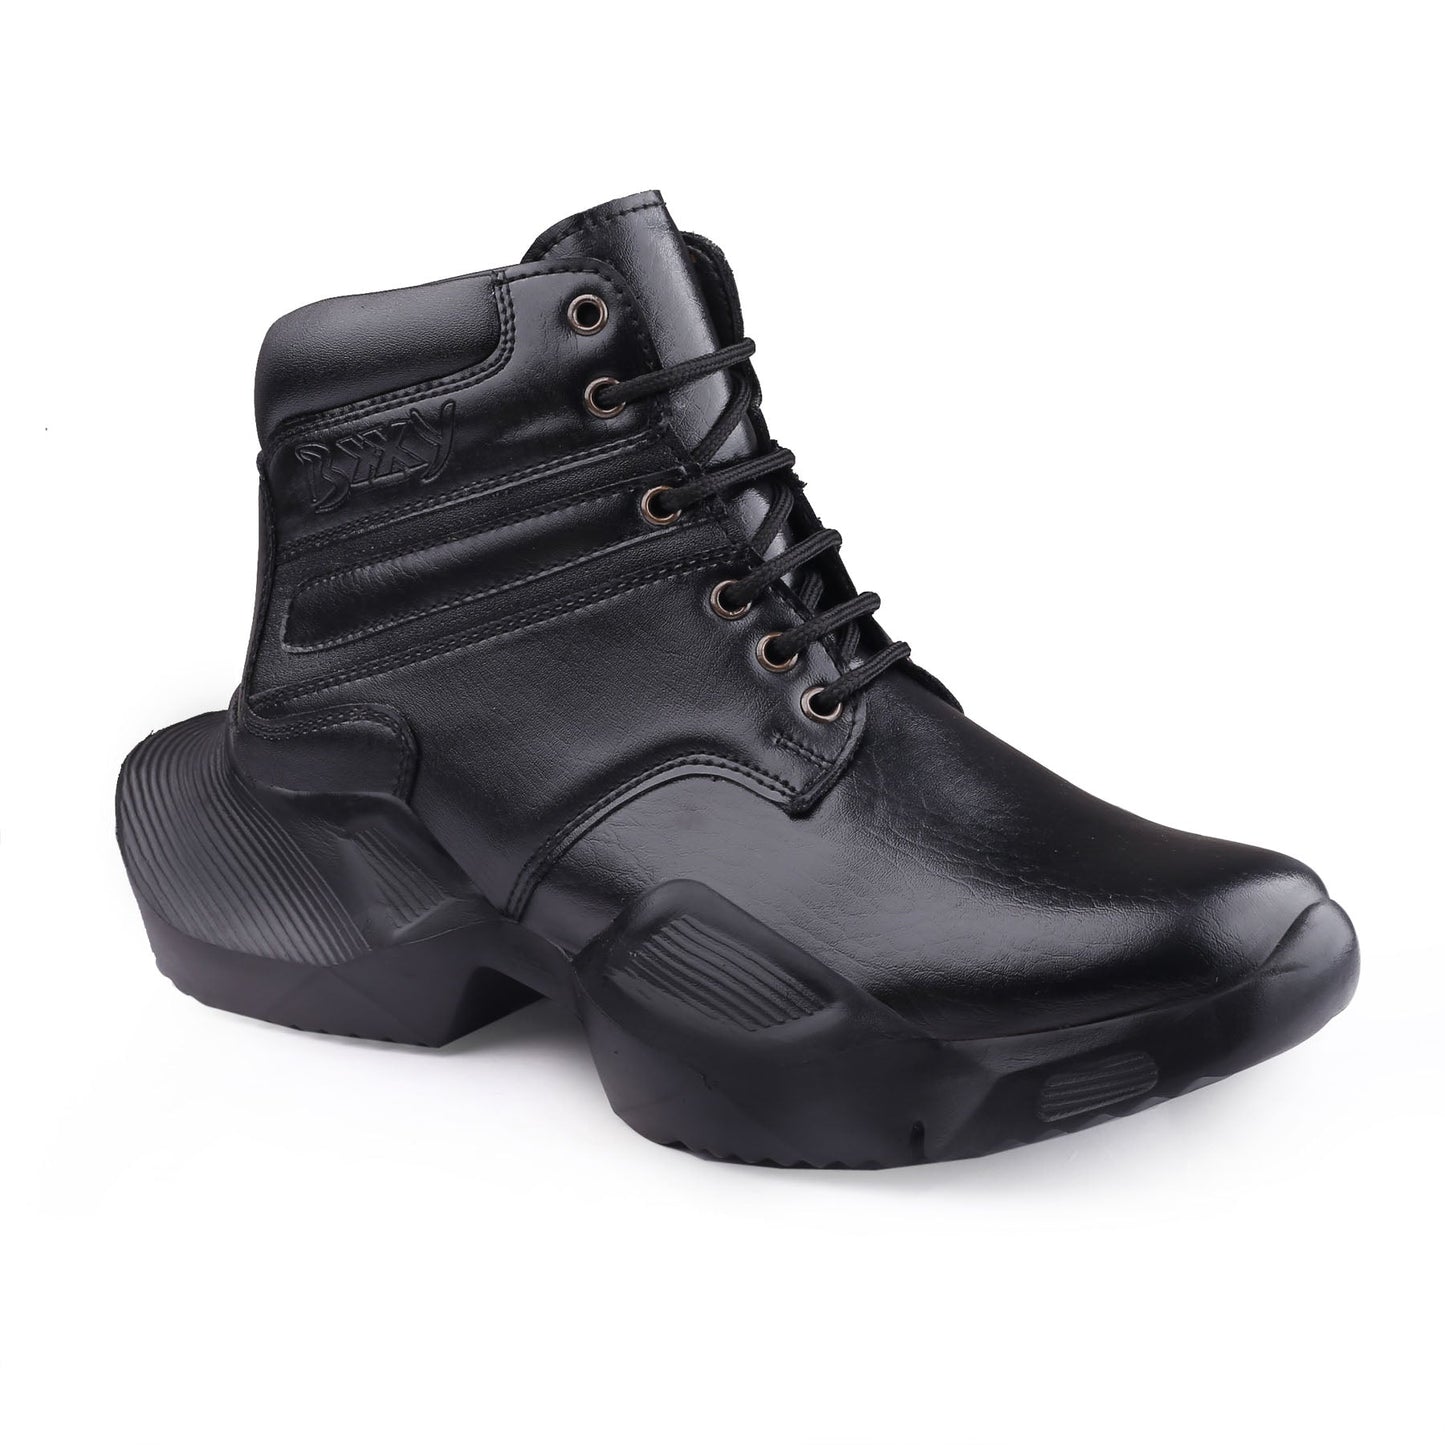 Men's 4 Inch Hidden Height Increasing Lace-up Ankle Boots